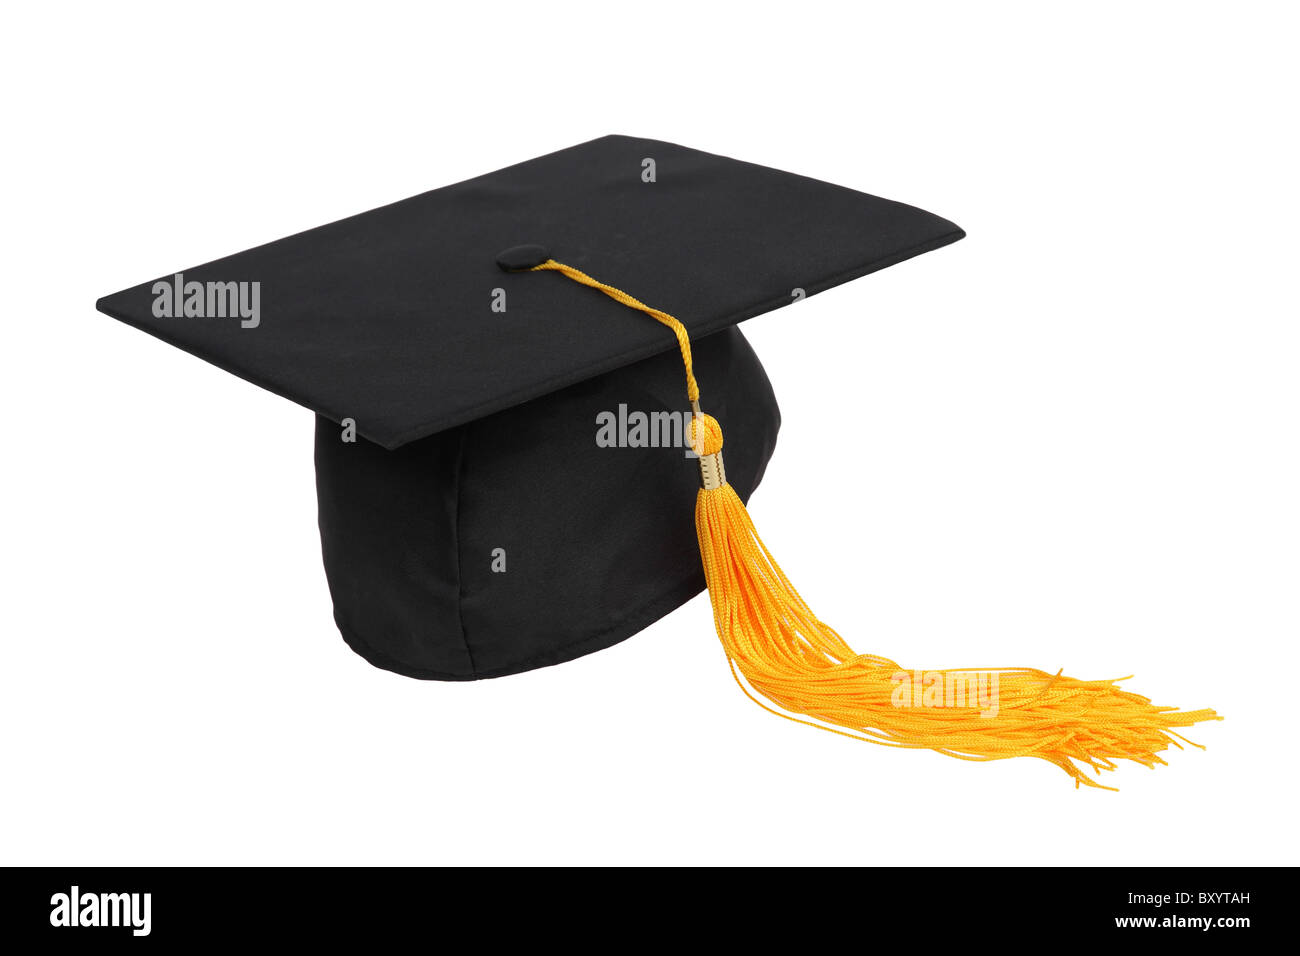 Graduation hat with tassel on white background Stock Photo